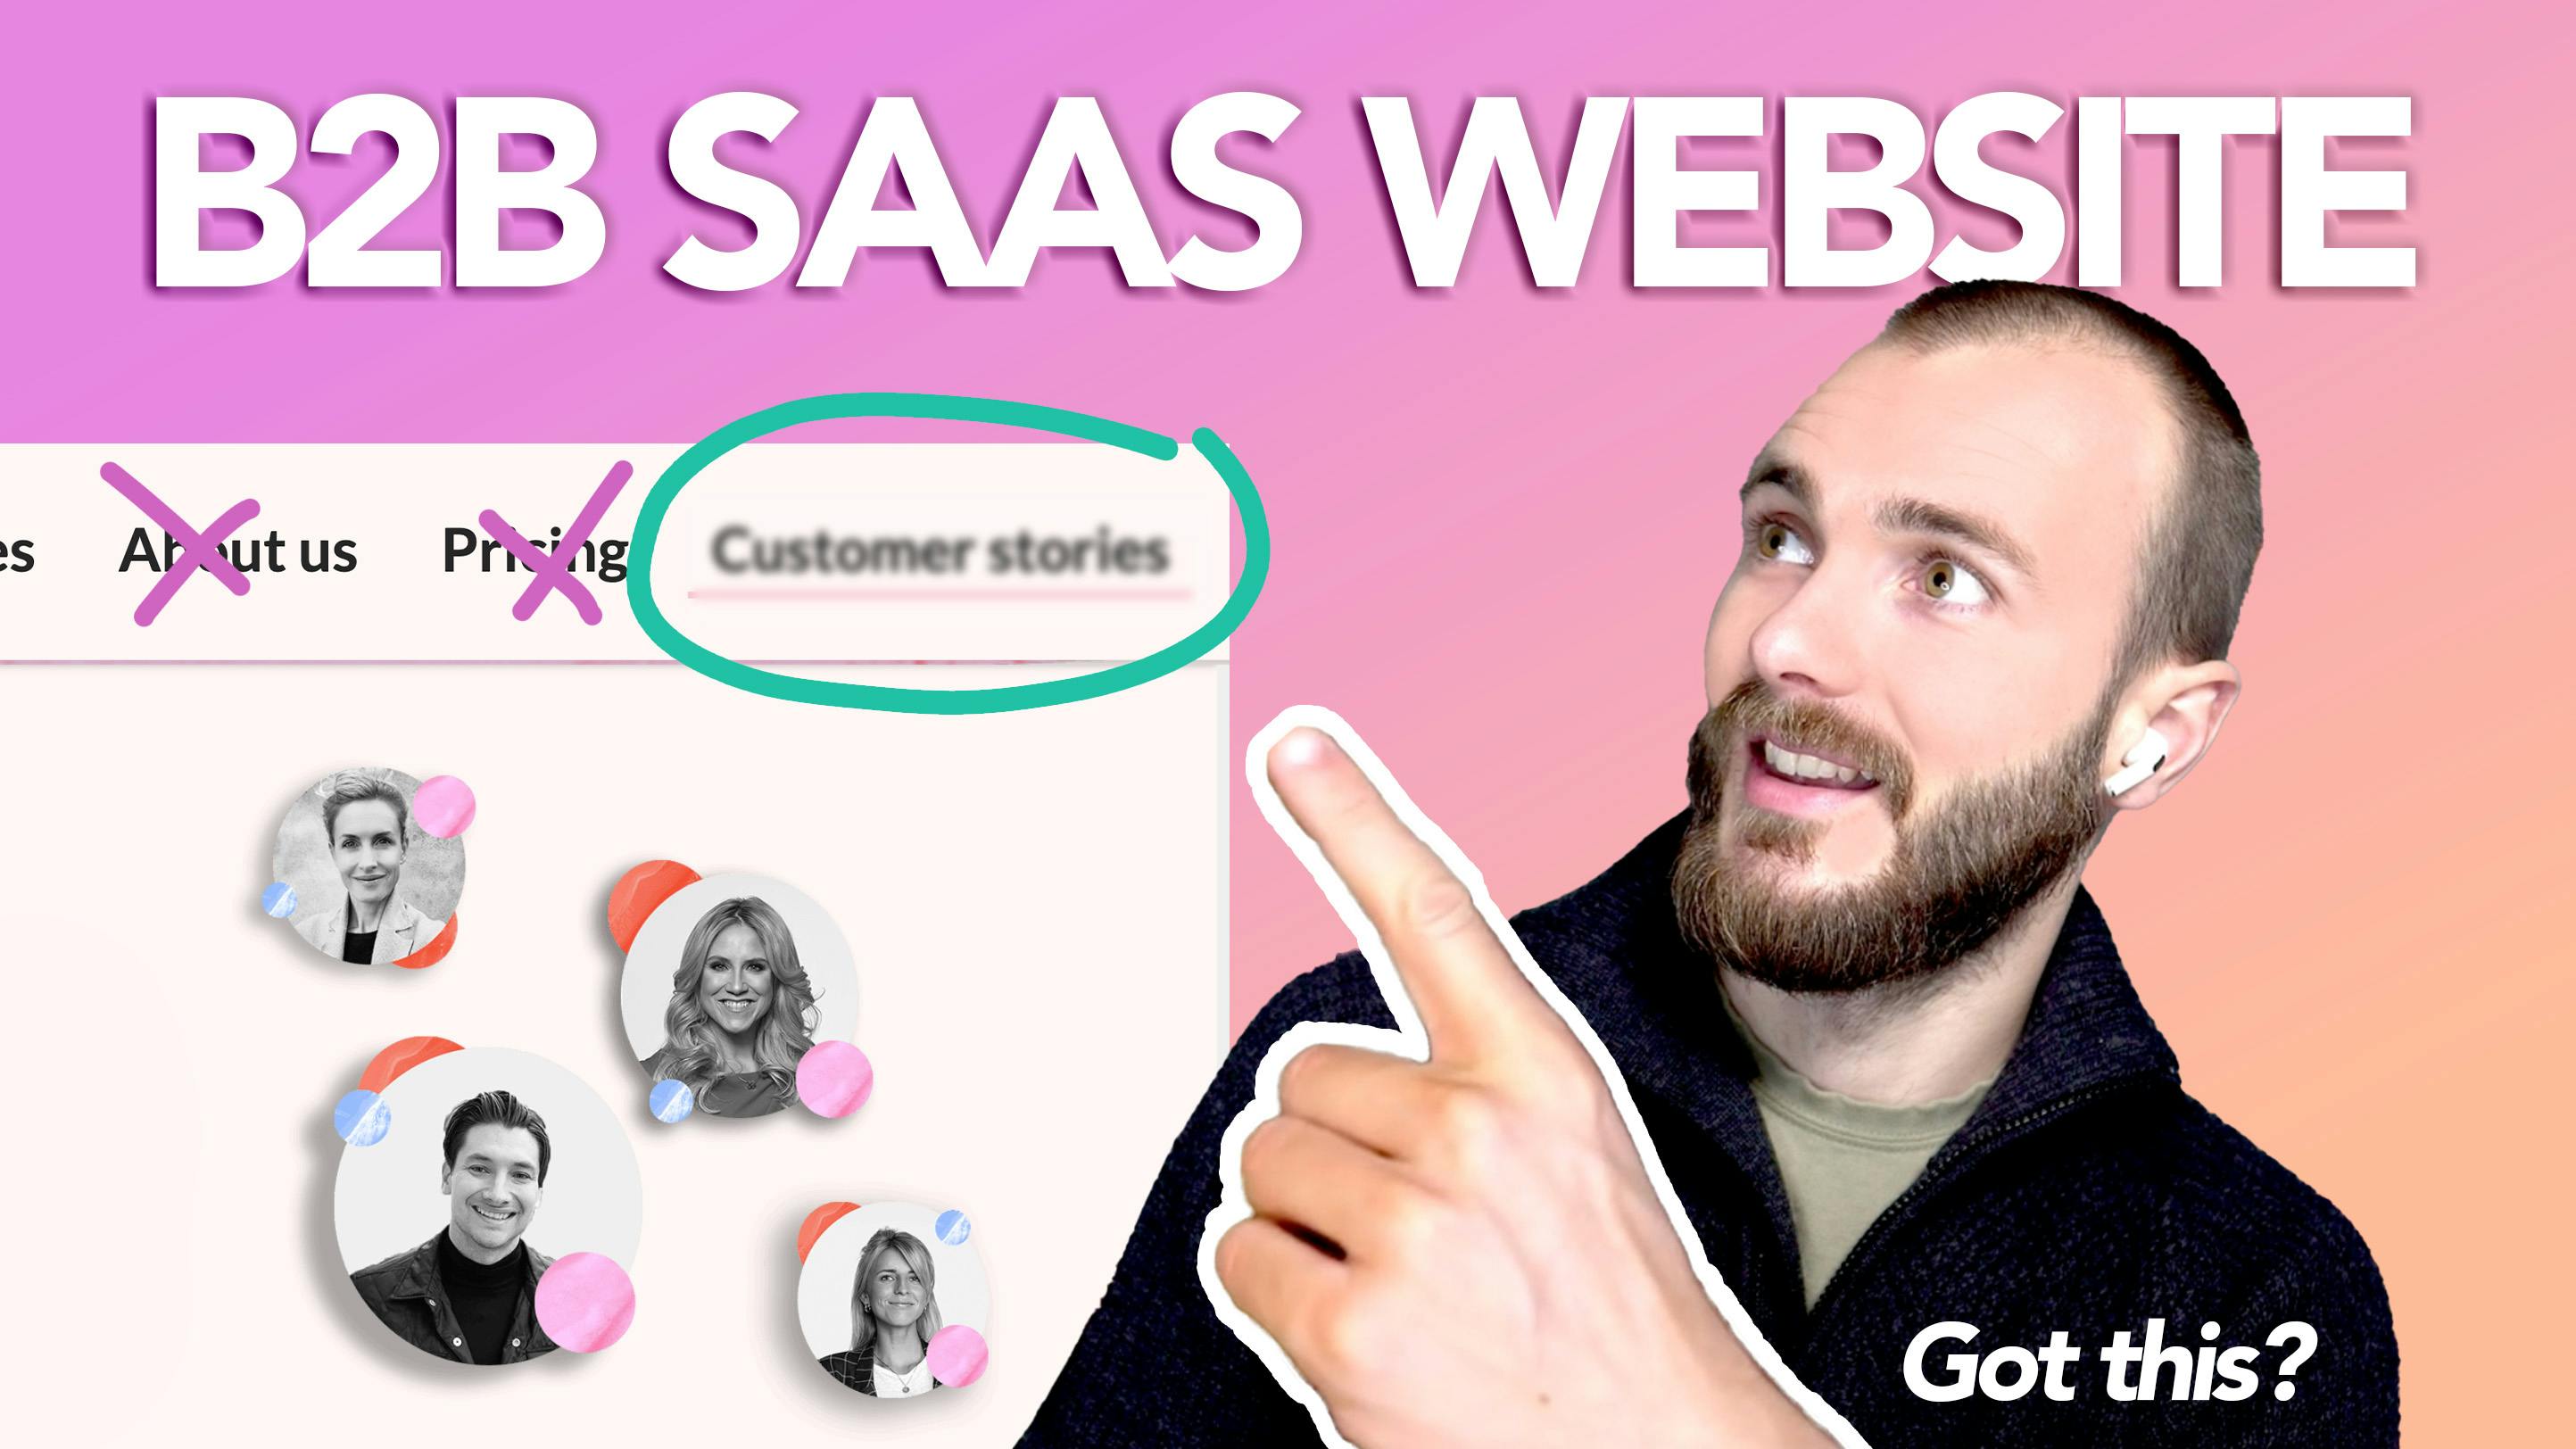 Customer stories to boost your B2B landing page